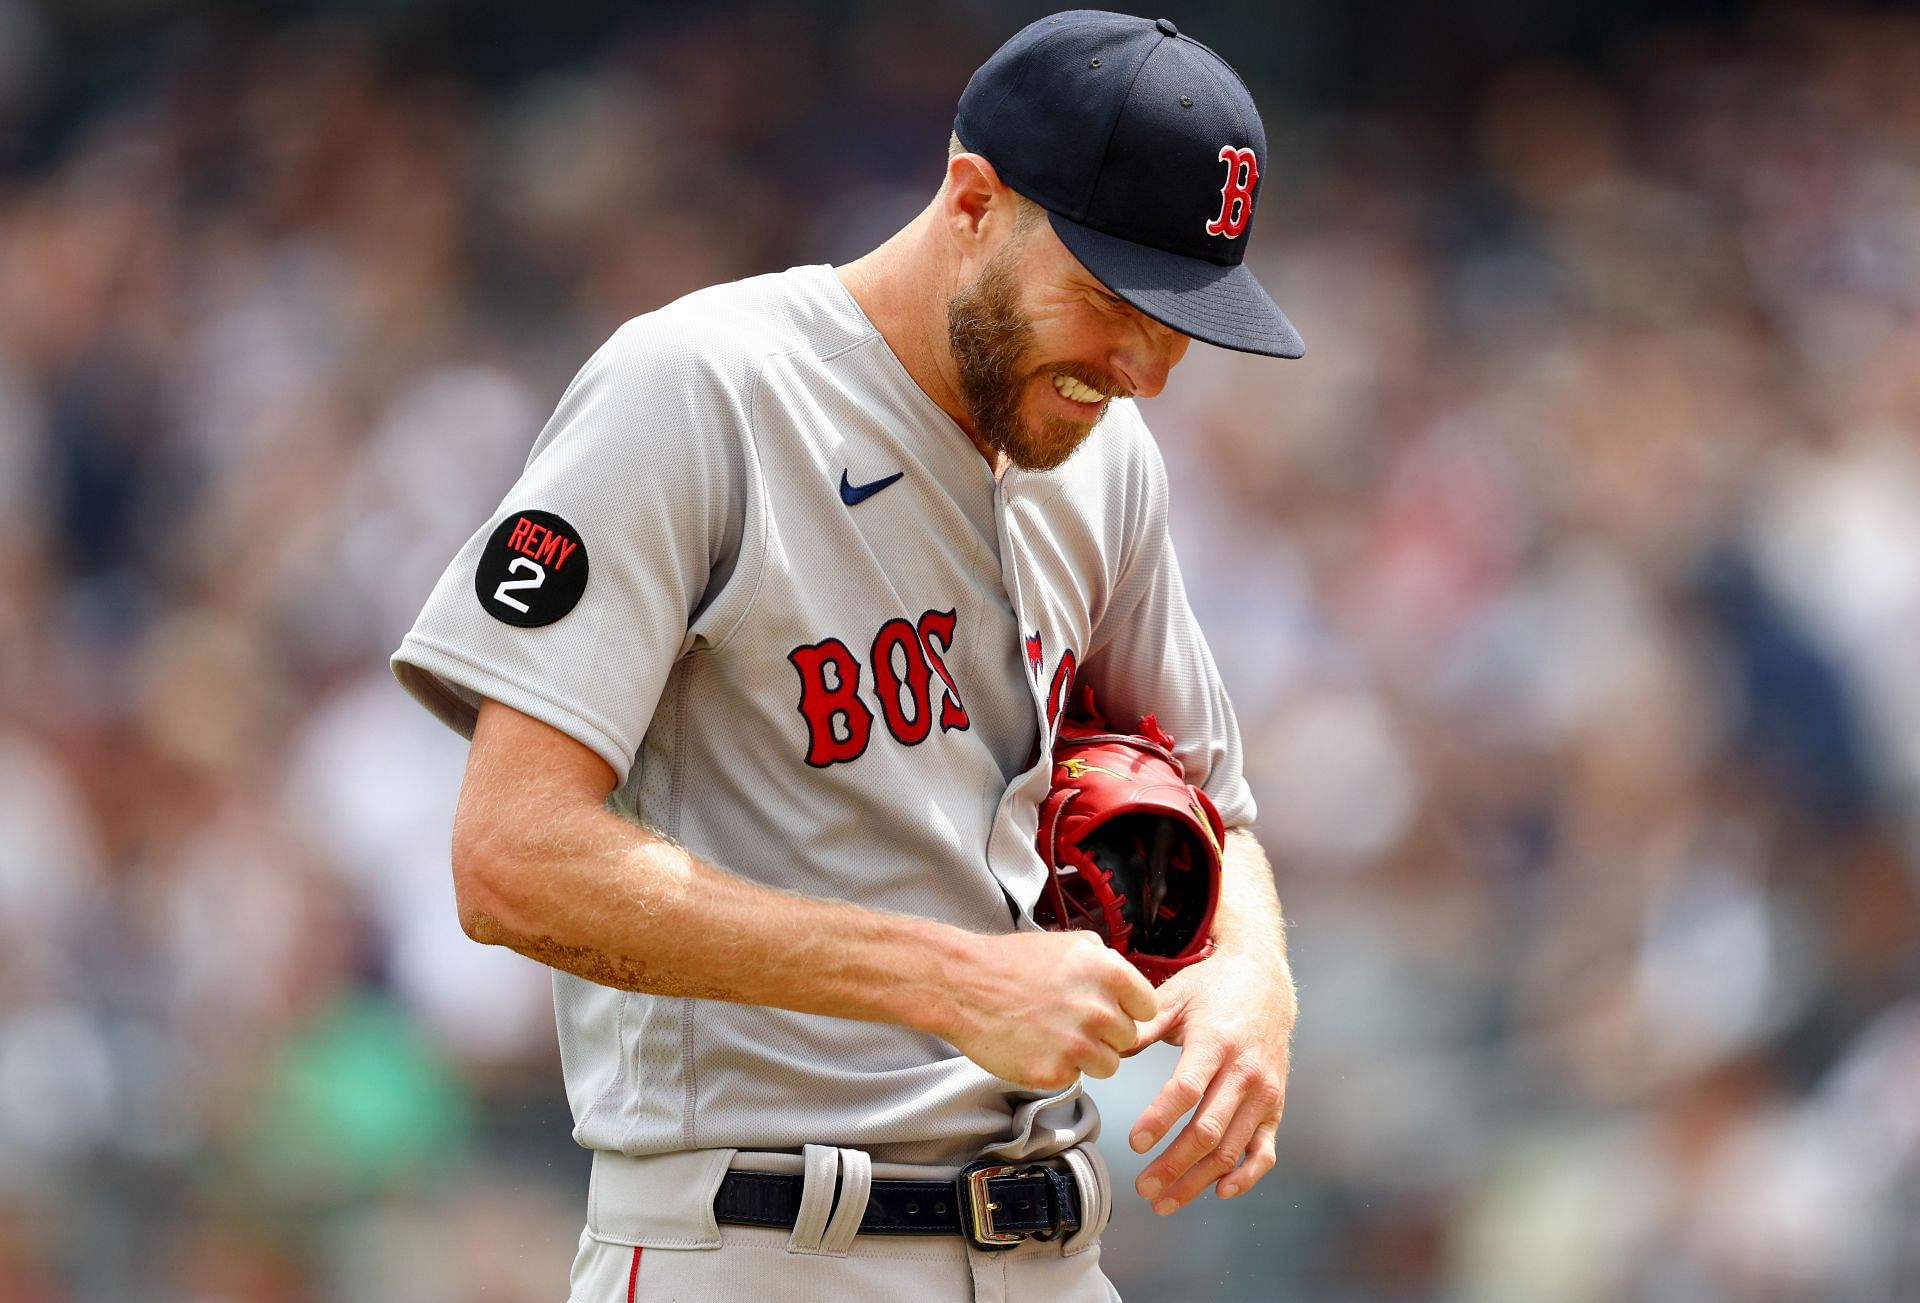 Chris Sale grimaces in pain after finger injury.